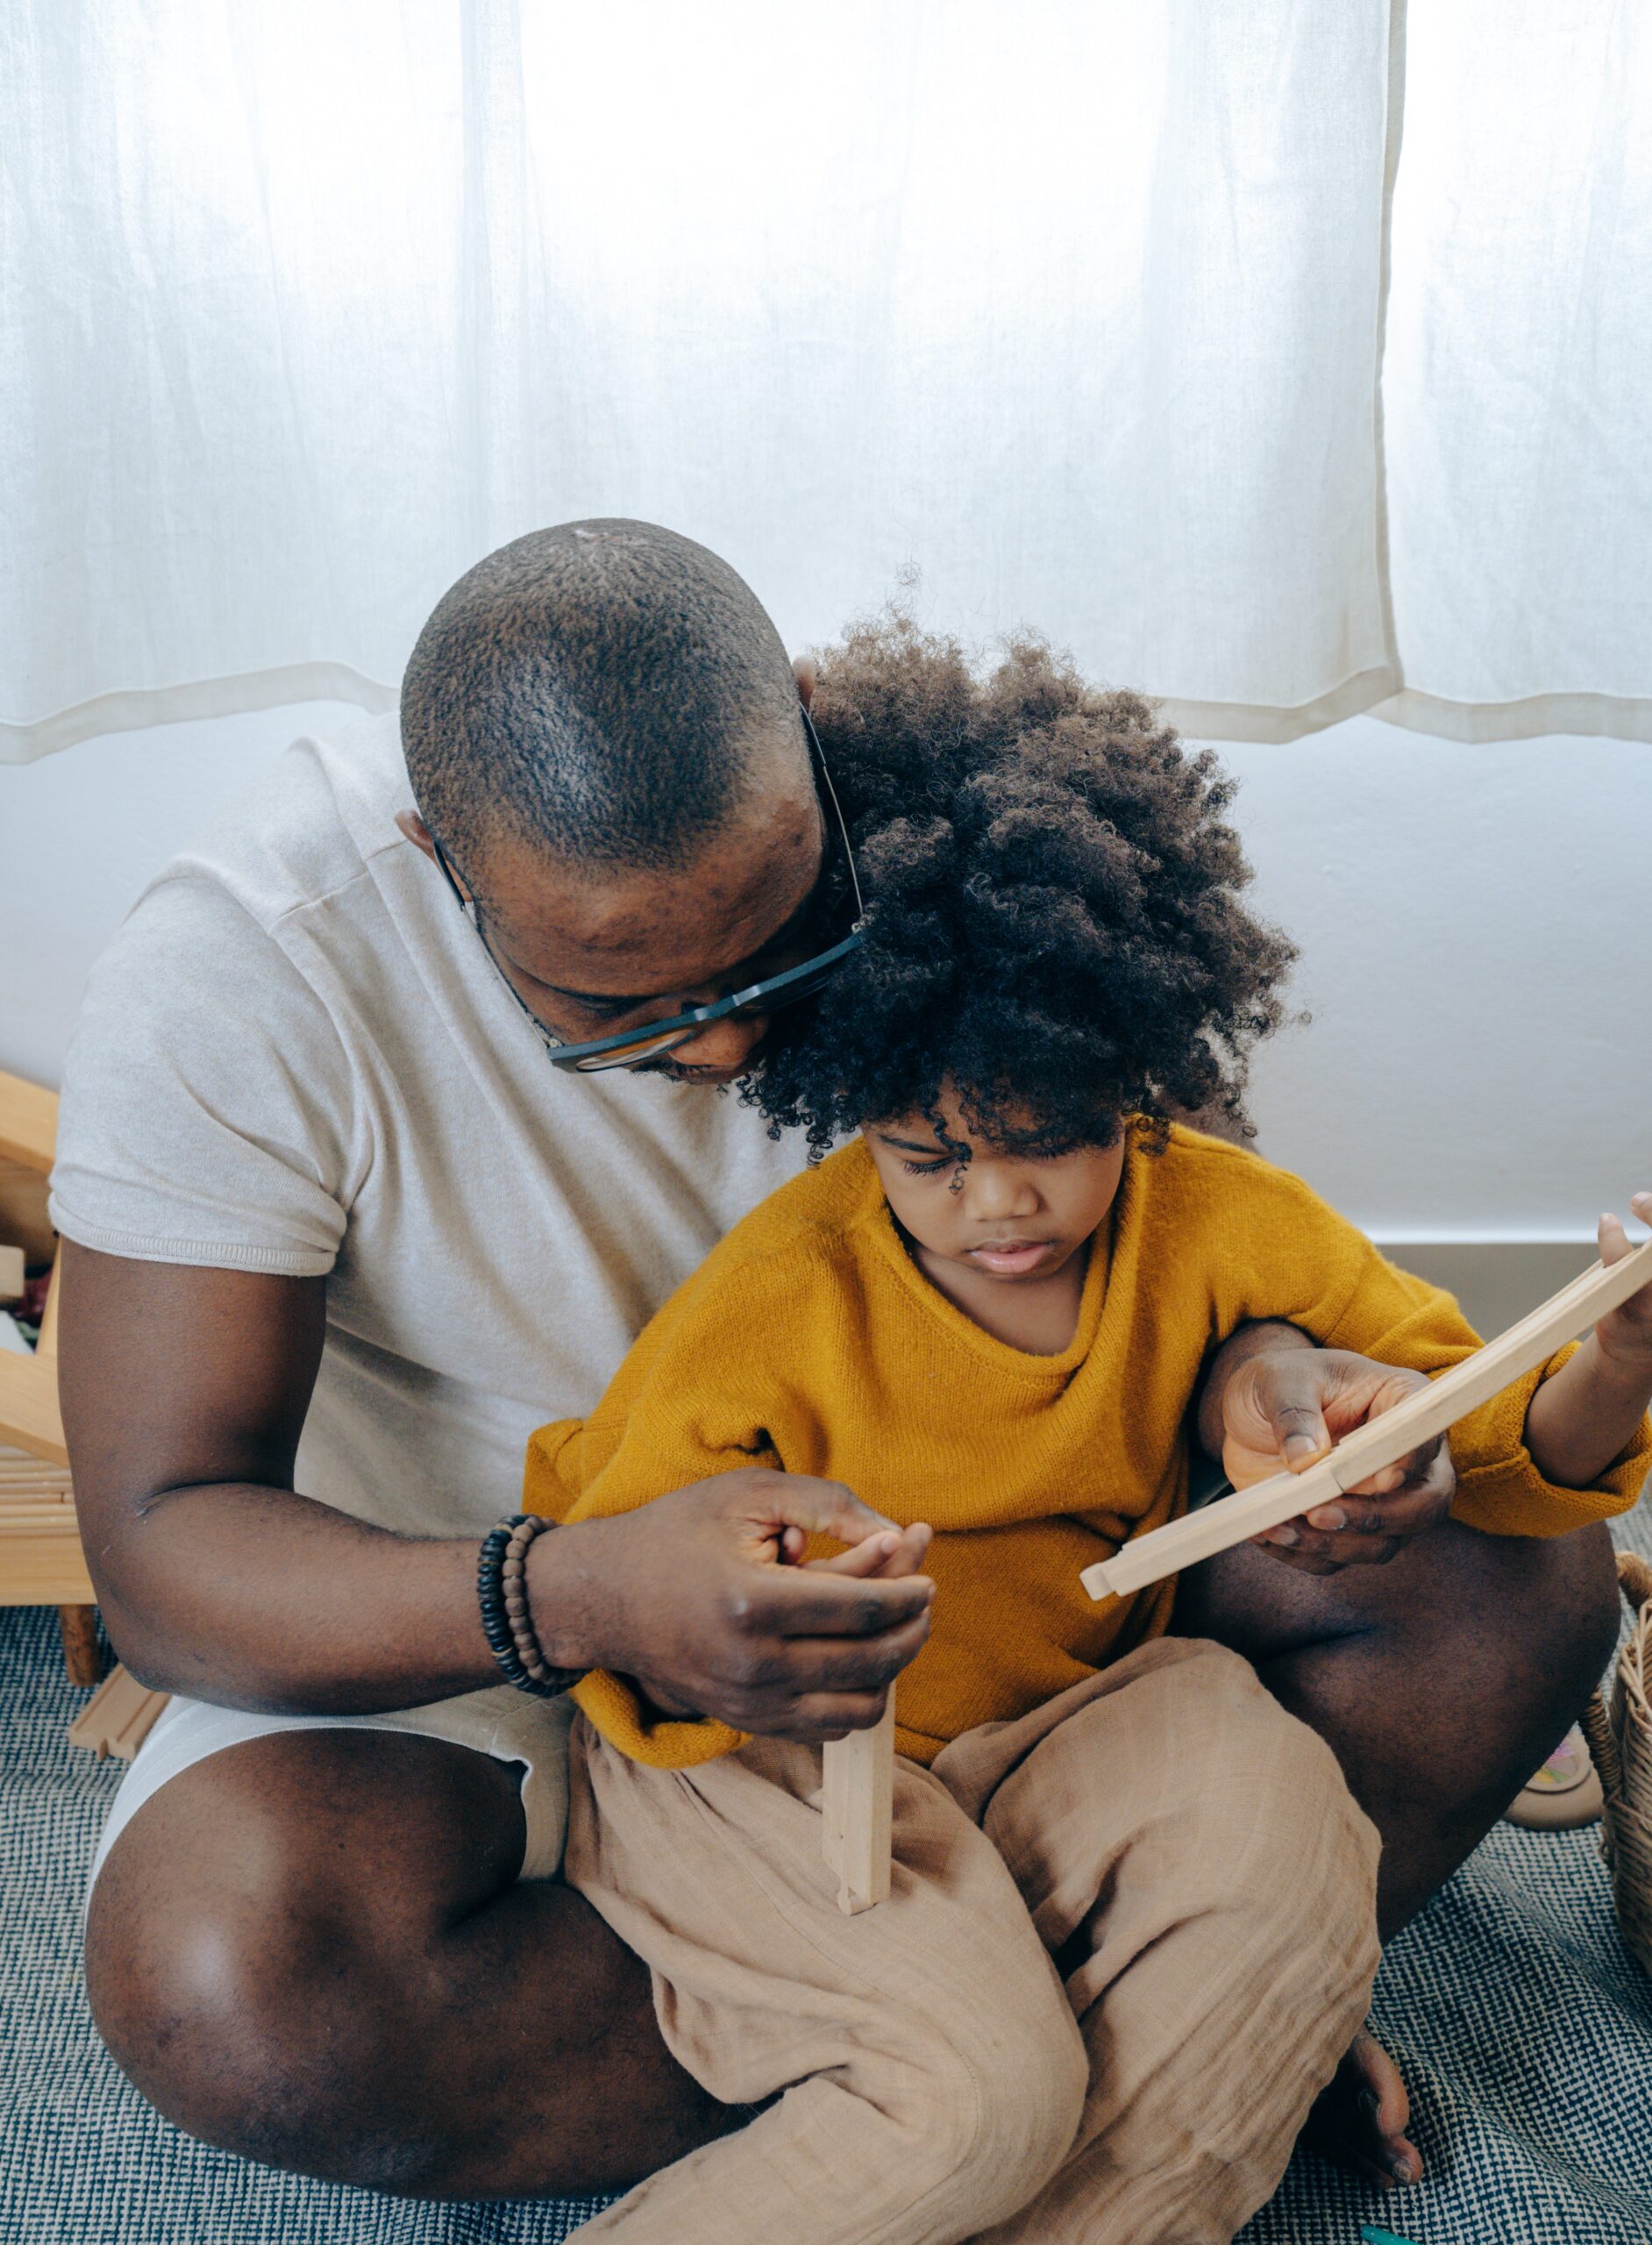 Father with child on his lap and reading from a book